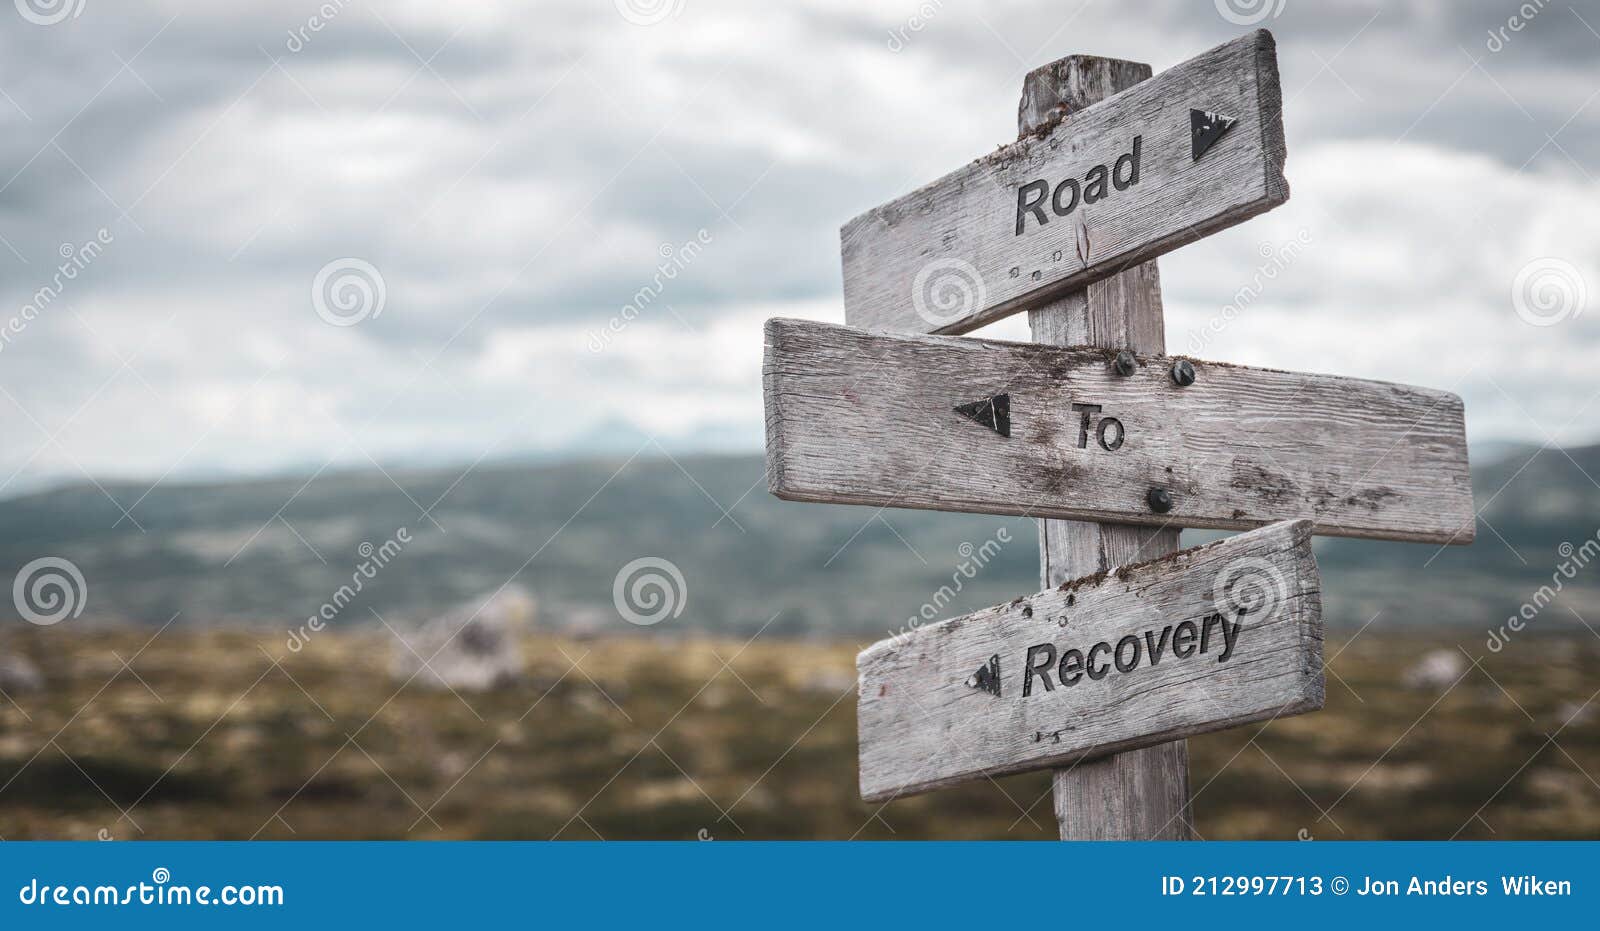 road to recovery text engraved on wooden signpost outdoors in nature.